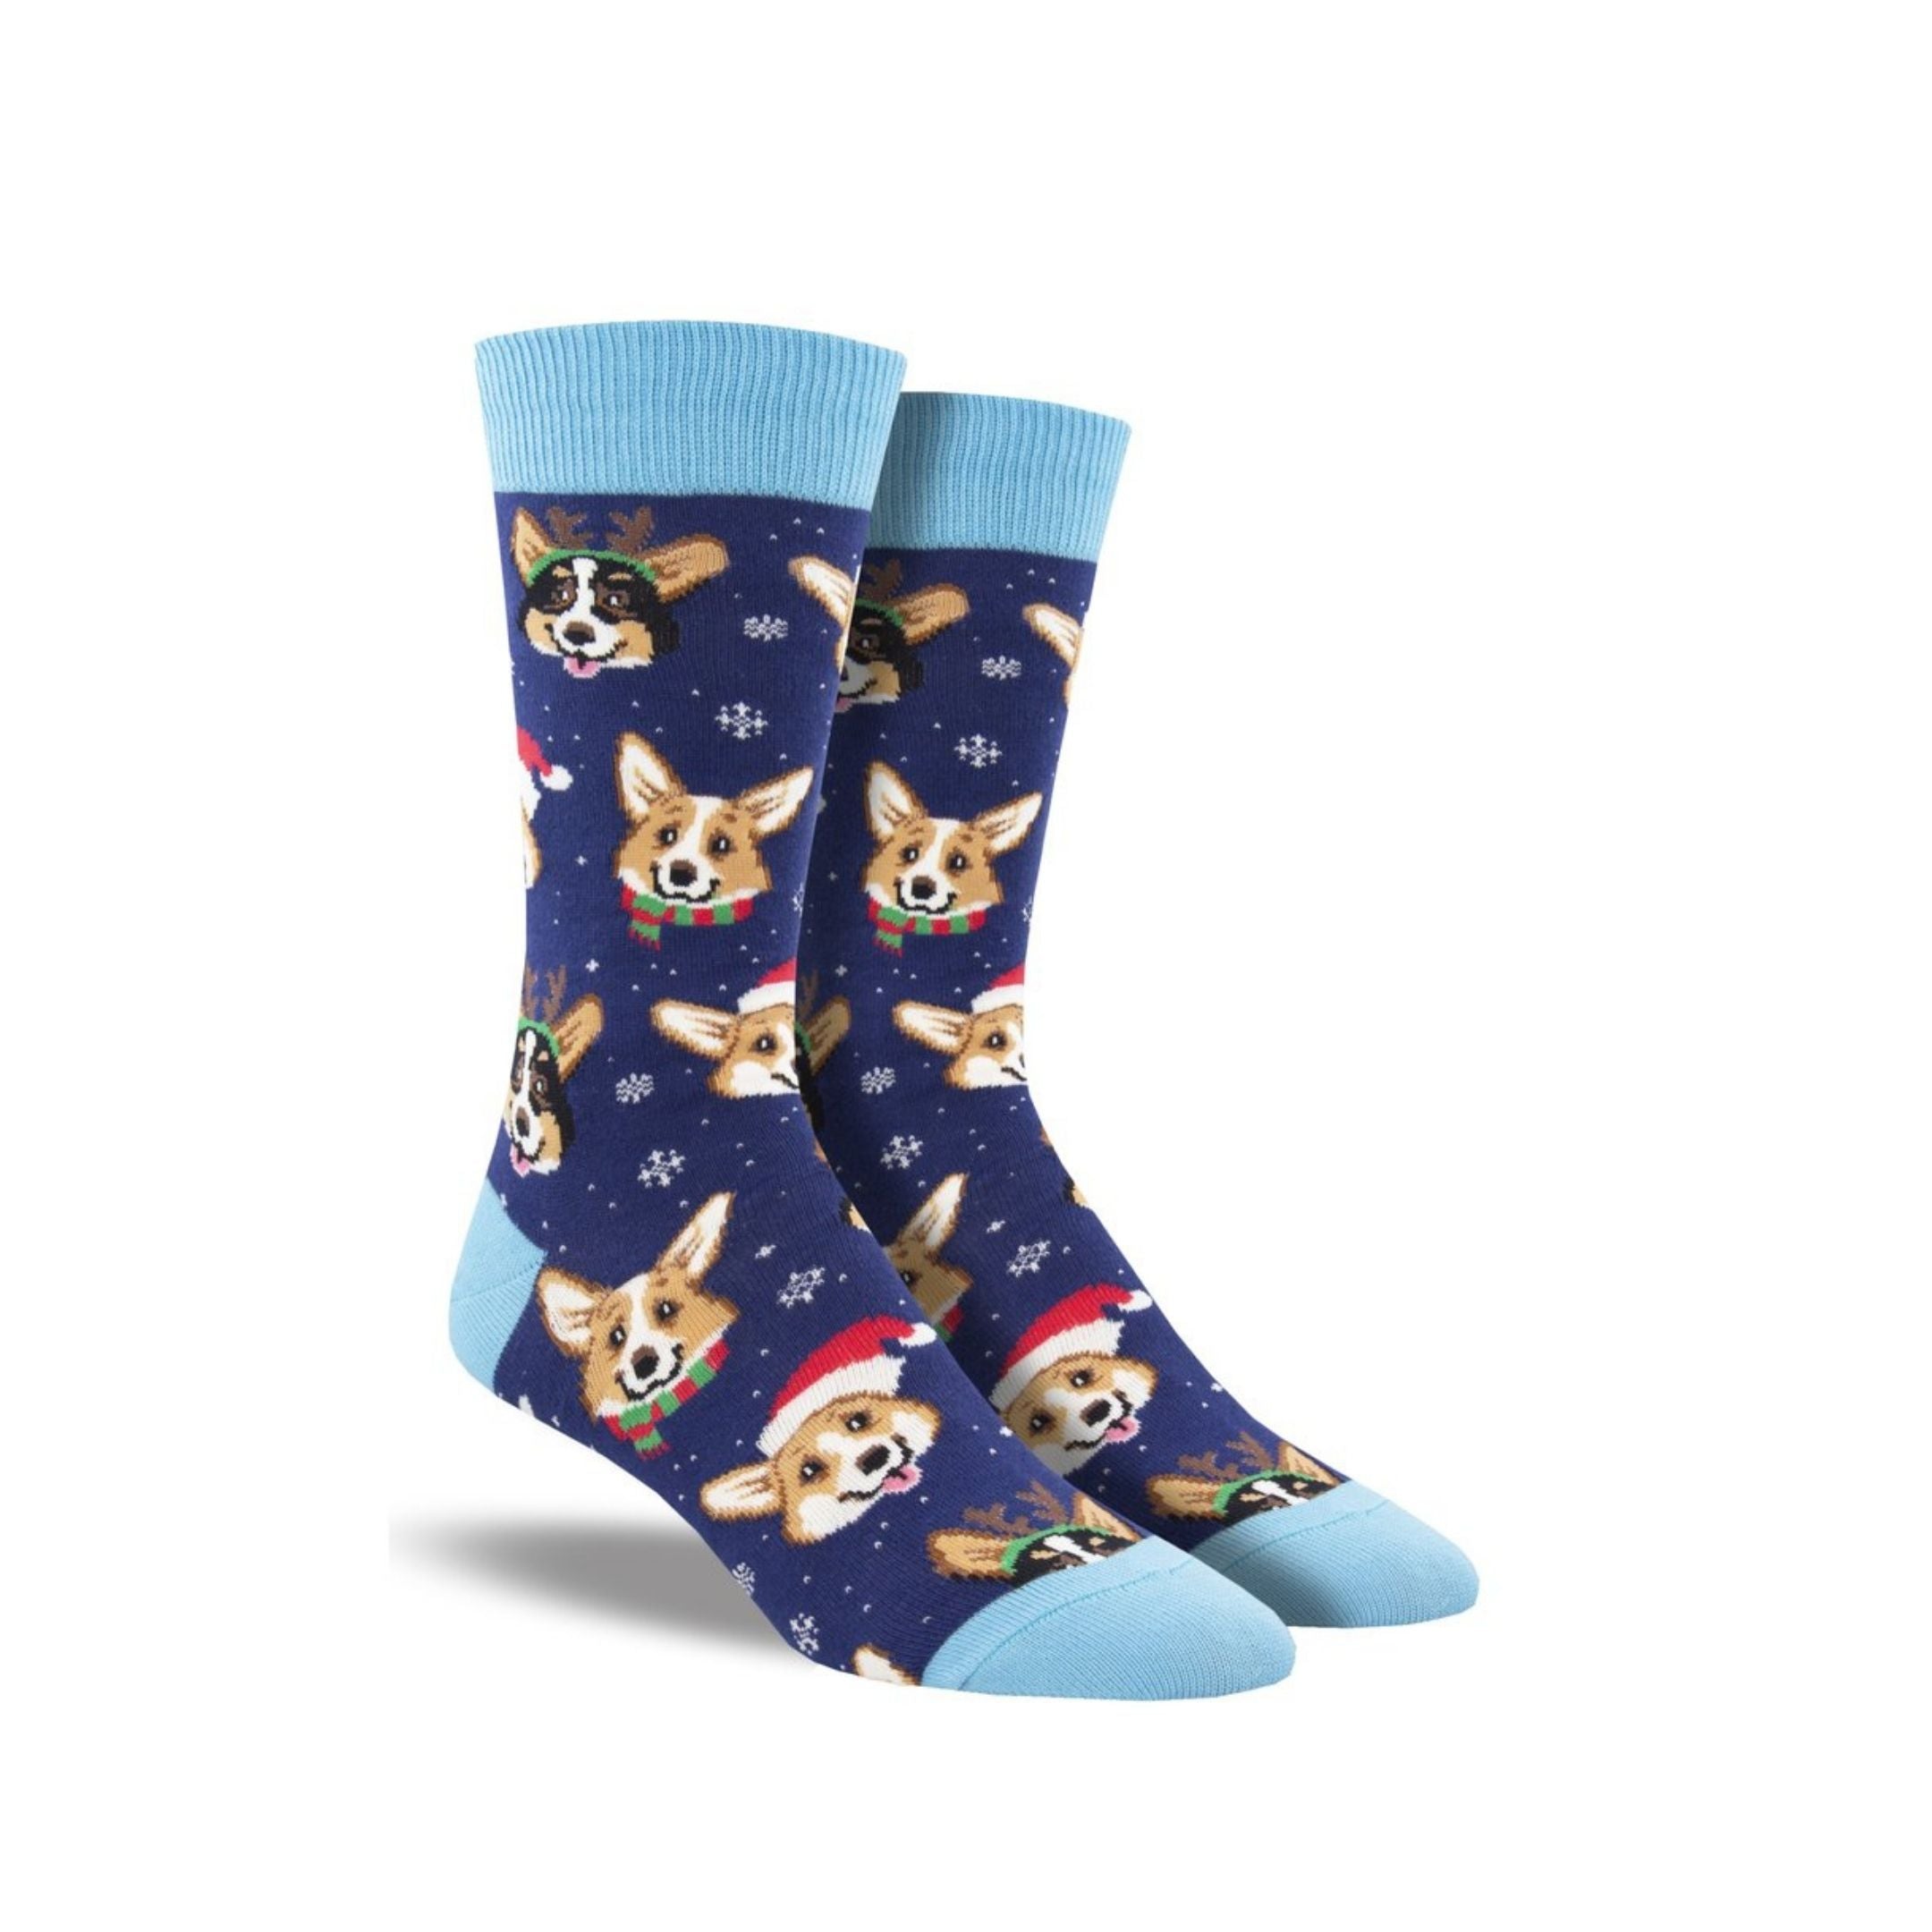 Dark and light blue socks with Holiday themed corgis on it